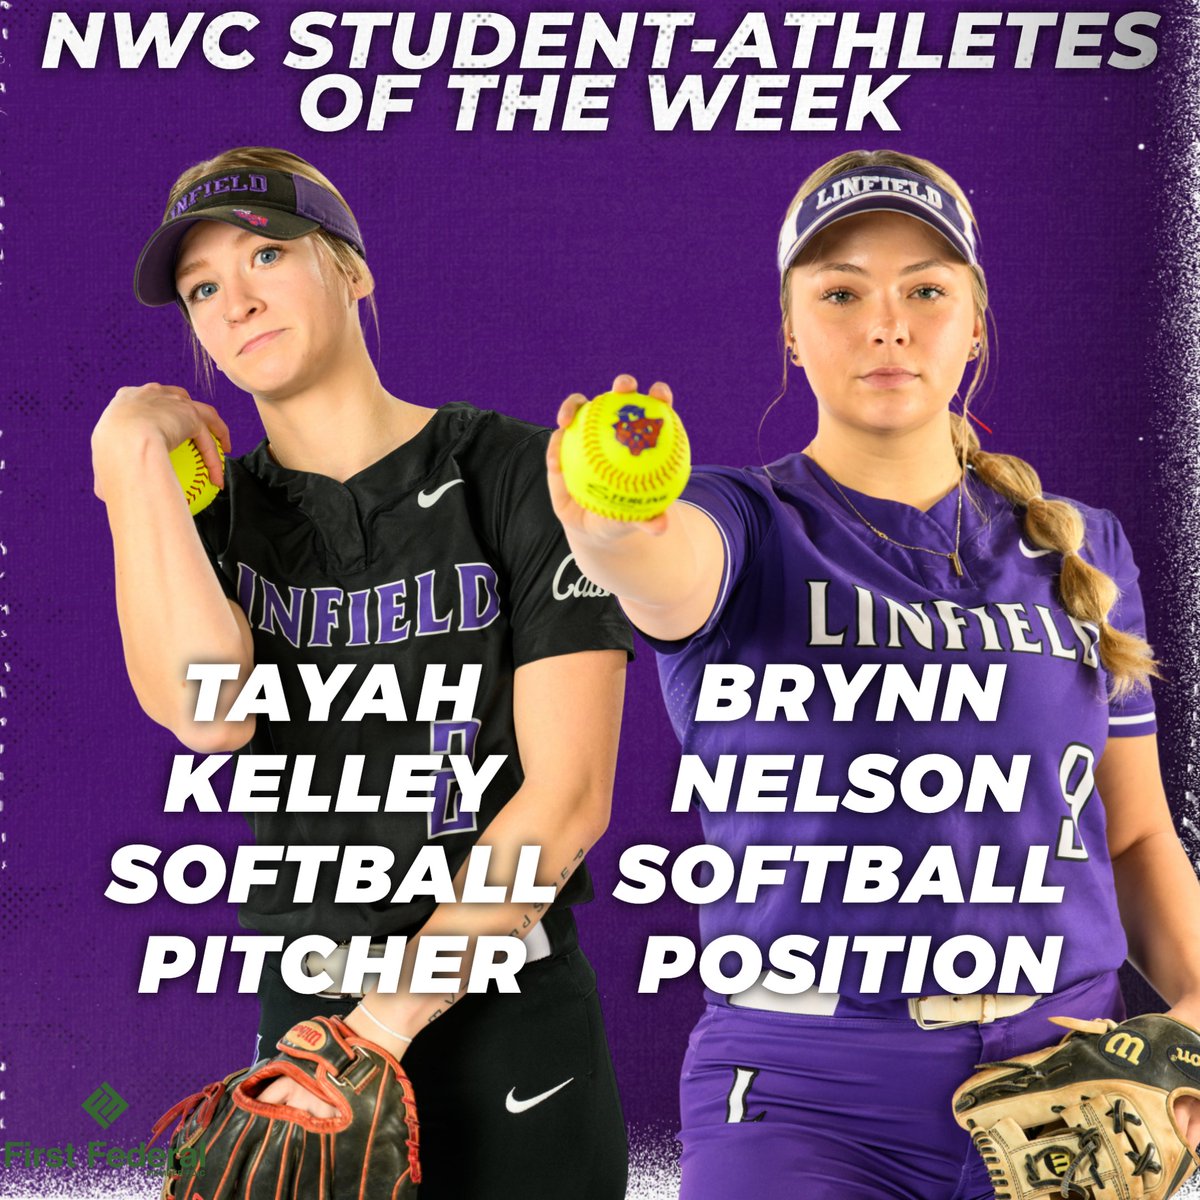 For the 𝙁𝙊𝙐𝙍𝙏𝙃 time this season, the Wildcats sweep the weekly awards🟣🥎 Read more at: bit.ly/3xKzAvz #RollCats | #Catball | #d3softball